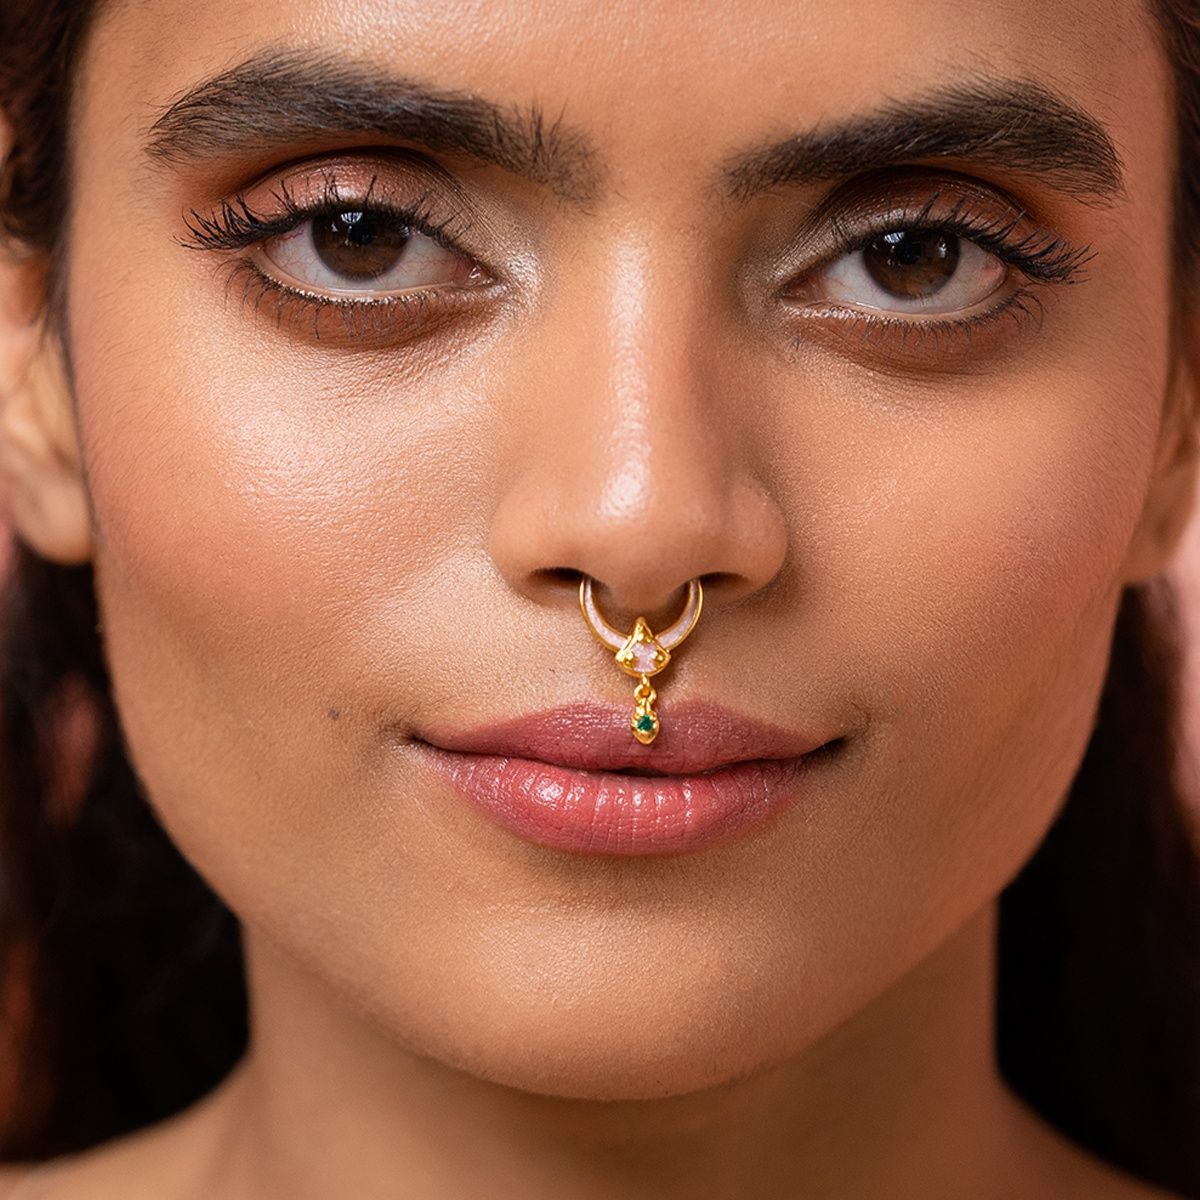 The Piercing Dictionary: Nose Piercings